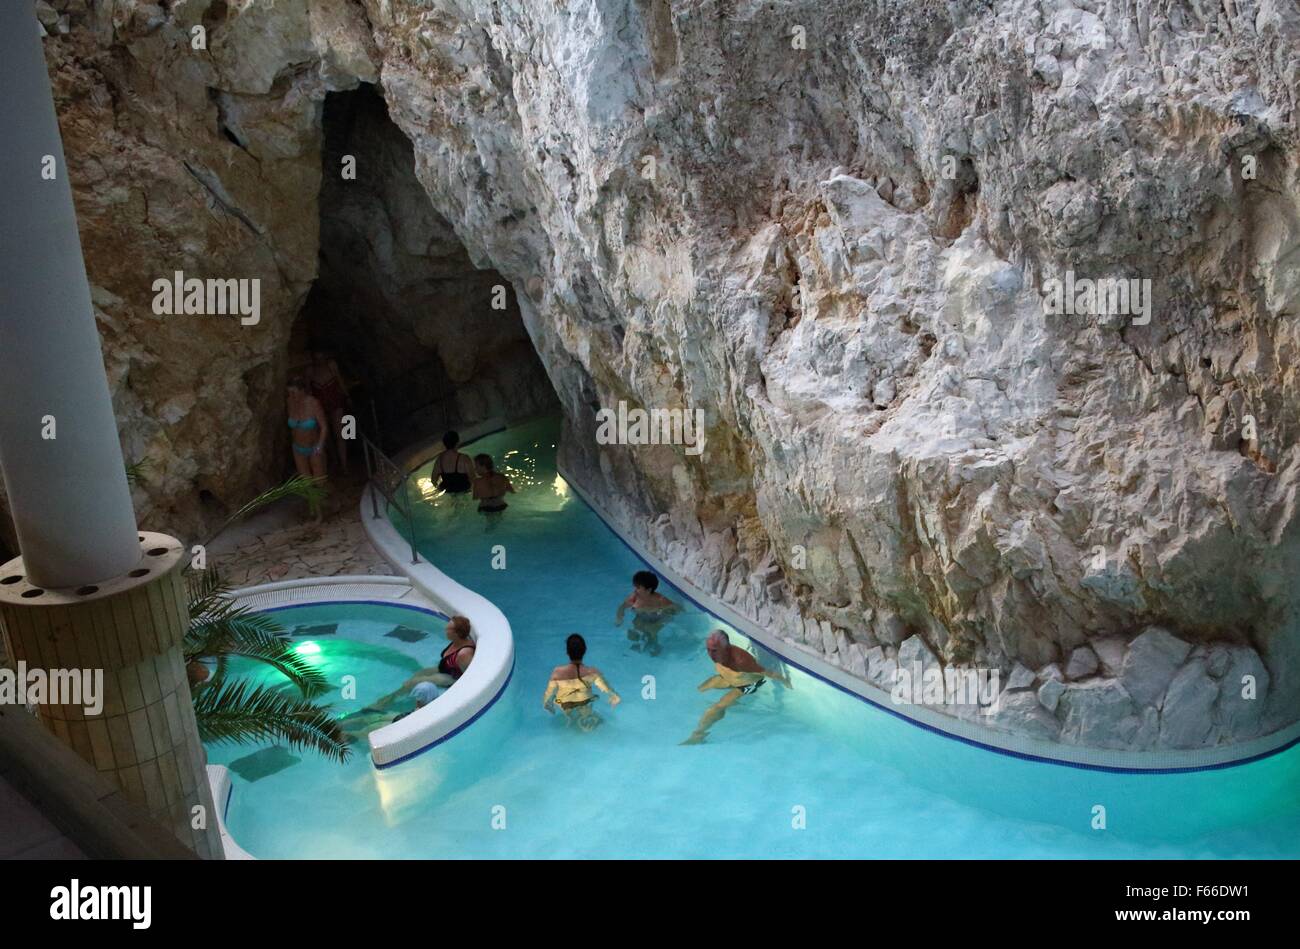 Miskolc, Hungary 12th, Nov. 2015 People enjoy stay at Miskolc Tapolca  Barlangfurdo Cave Bath (BarlangfŸrd?). The Cave Bath is a thermal bath in a  natural cave in Miskolctapolca, which is part of